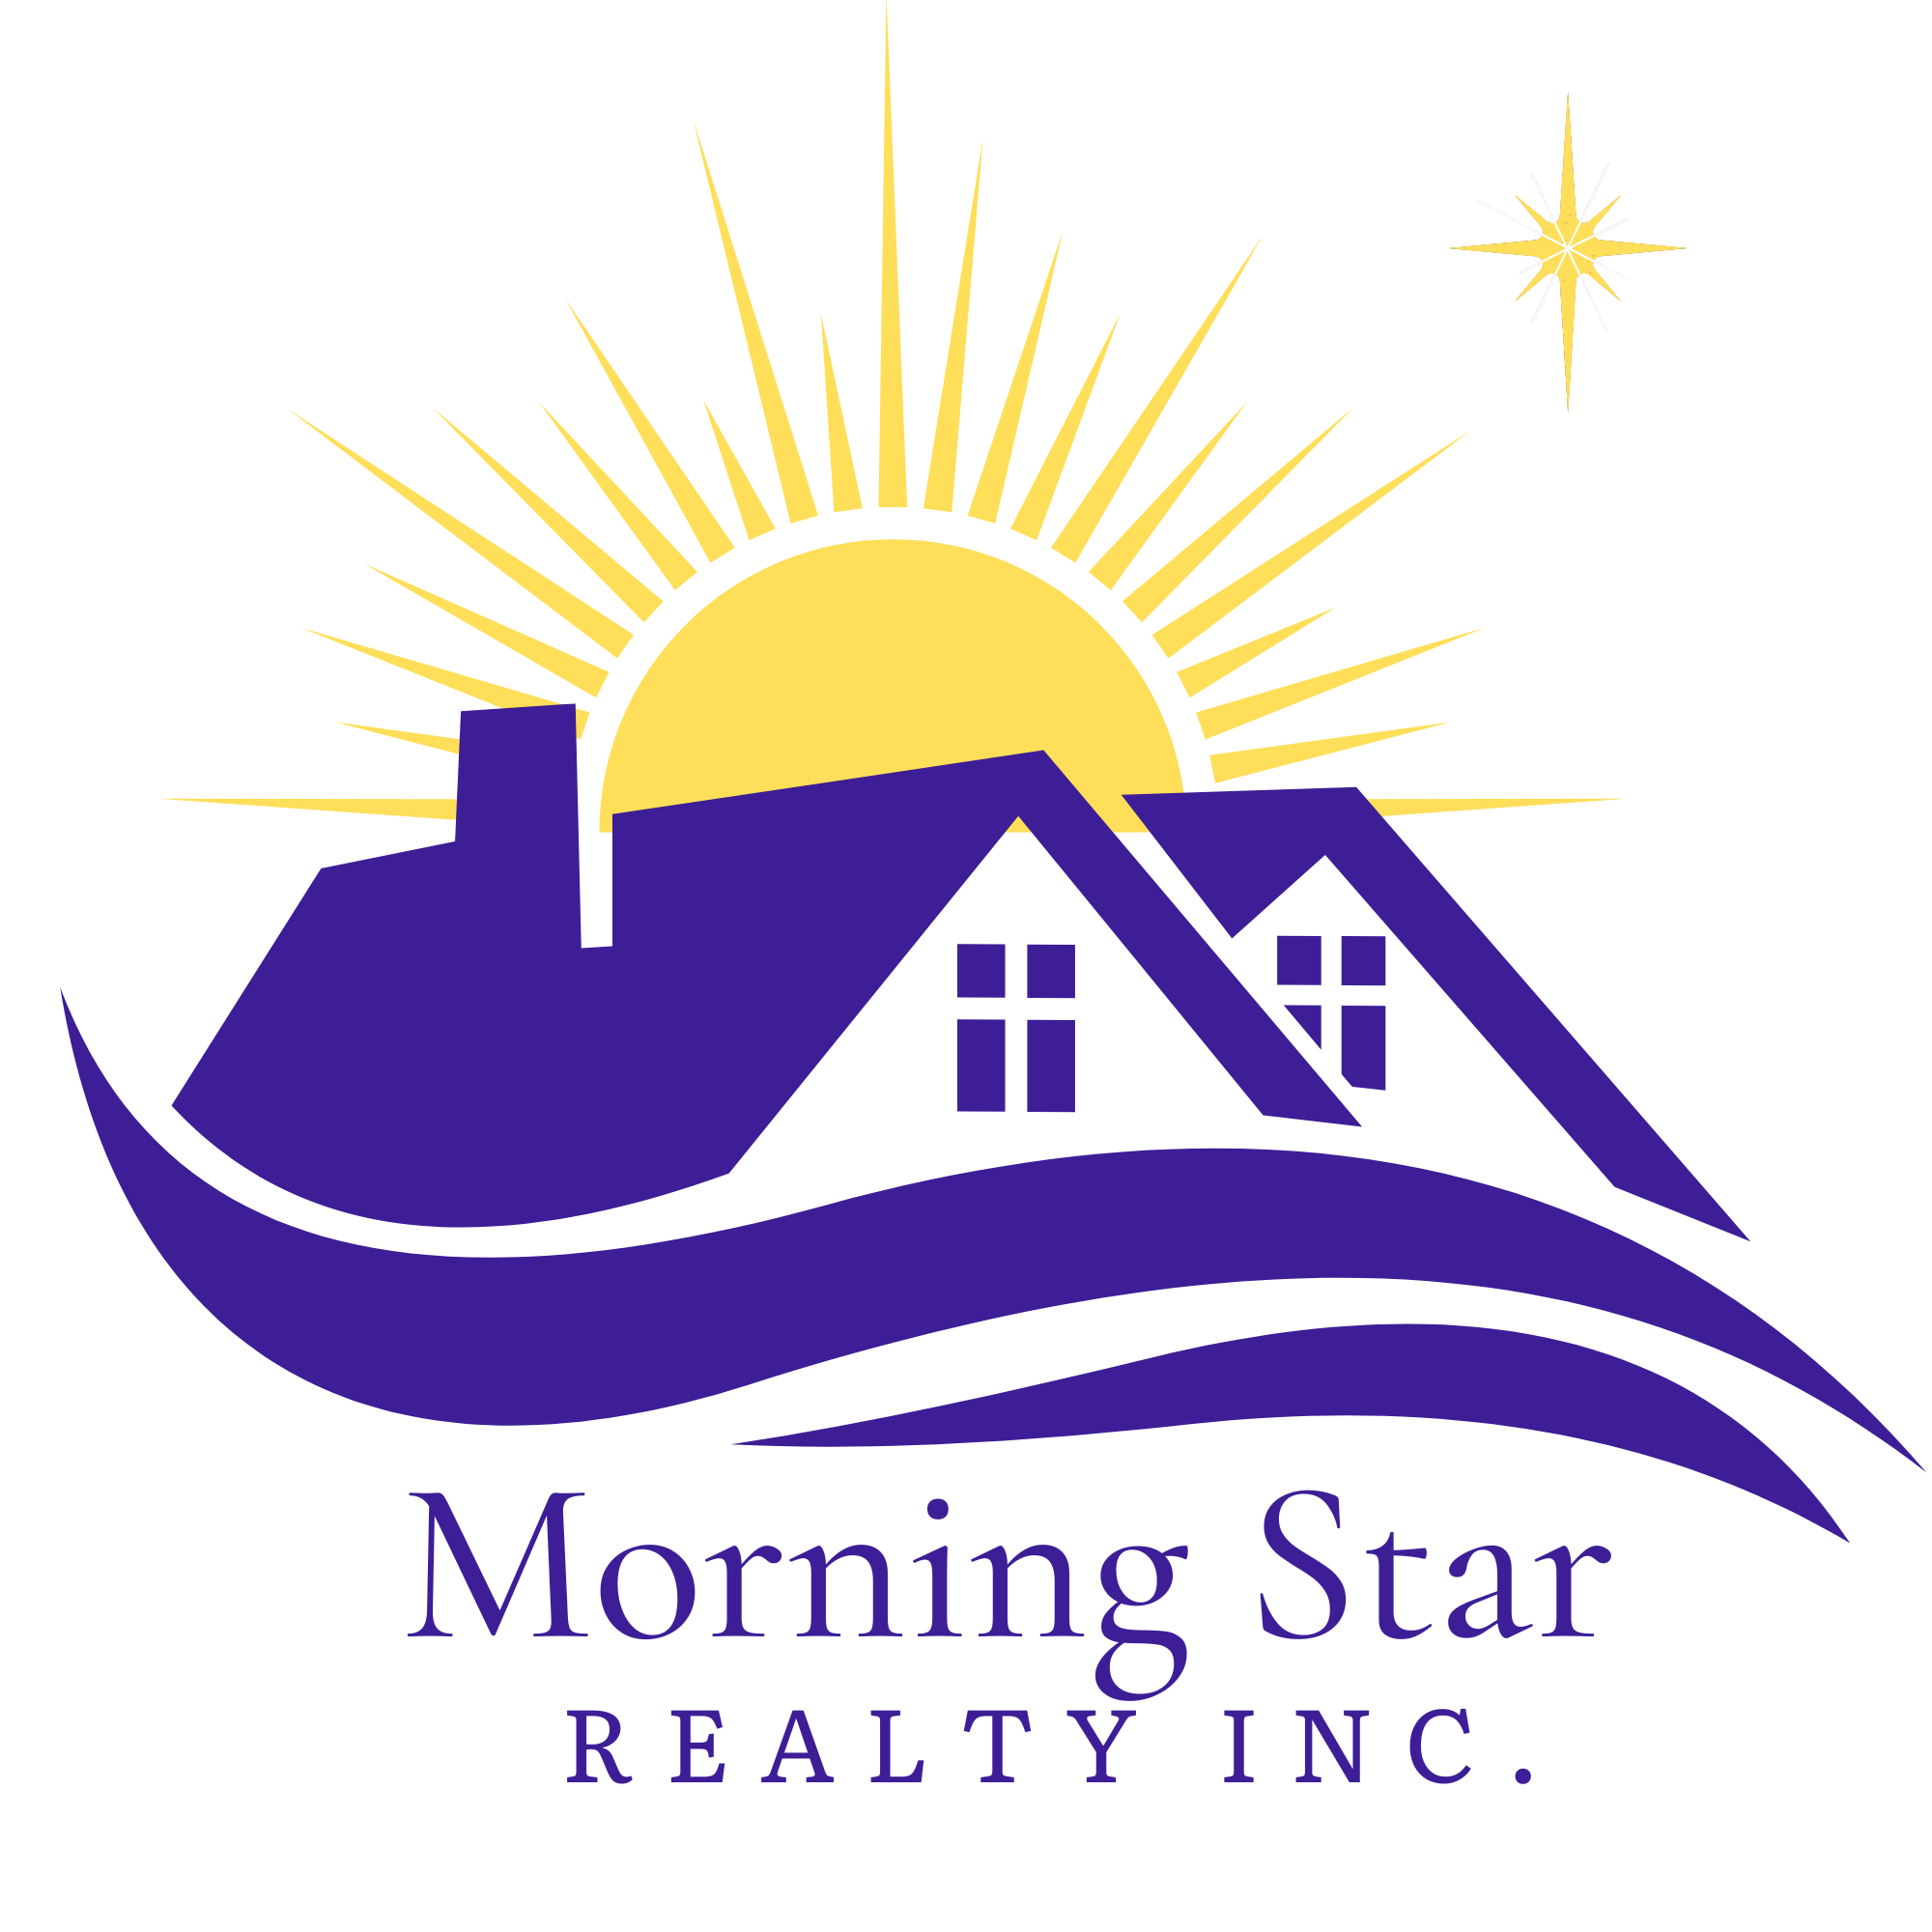 Morning Star Realty Inc. Sales and Education 